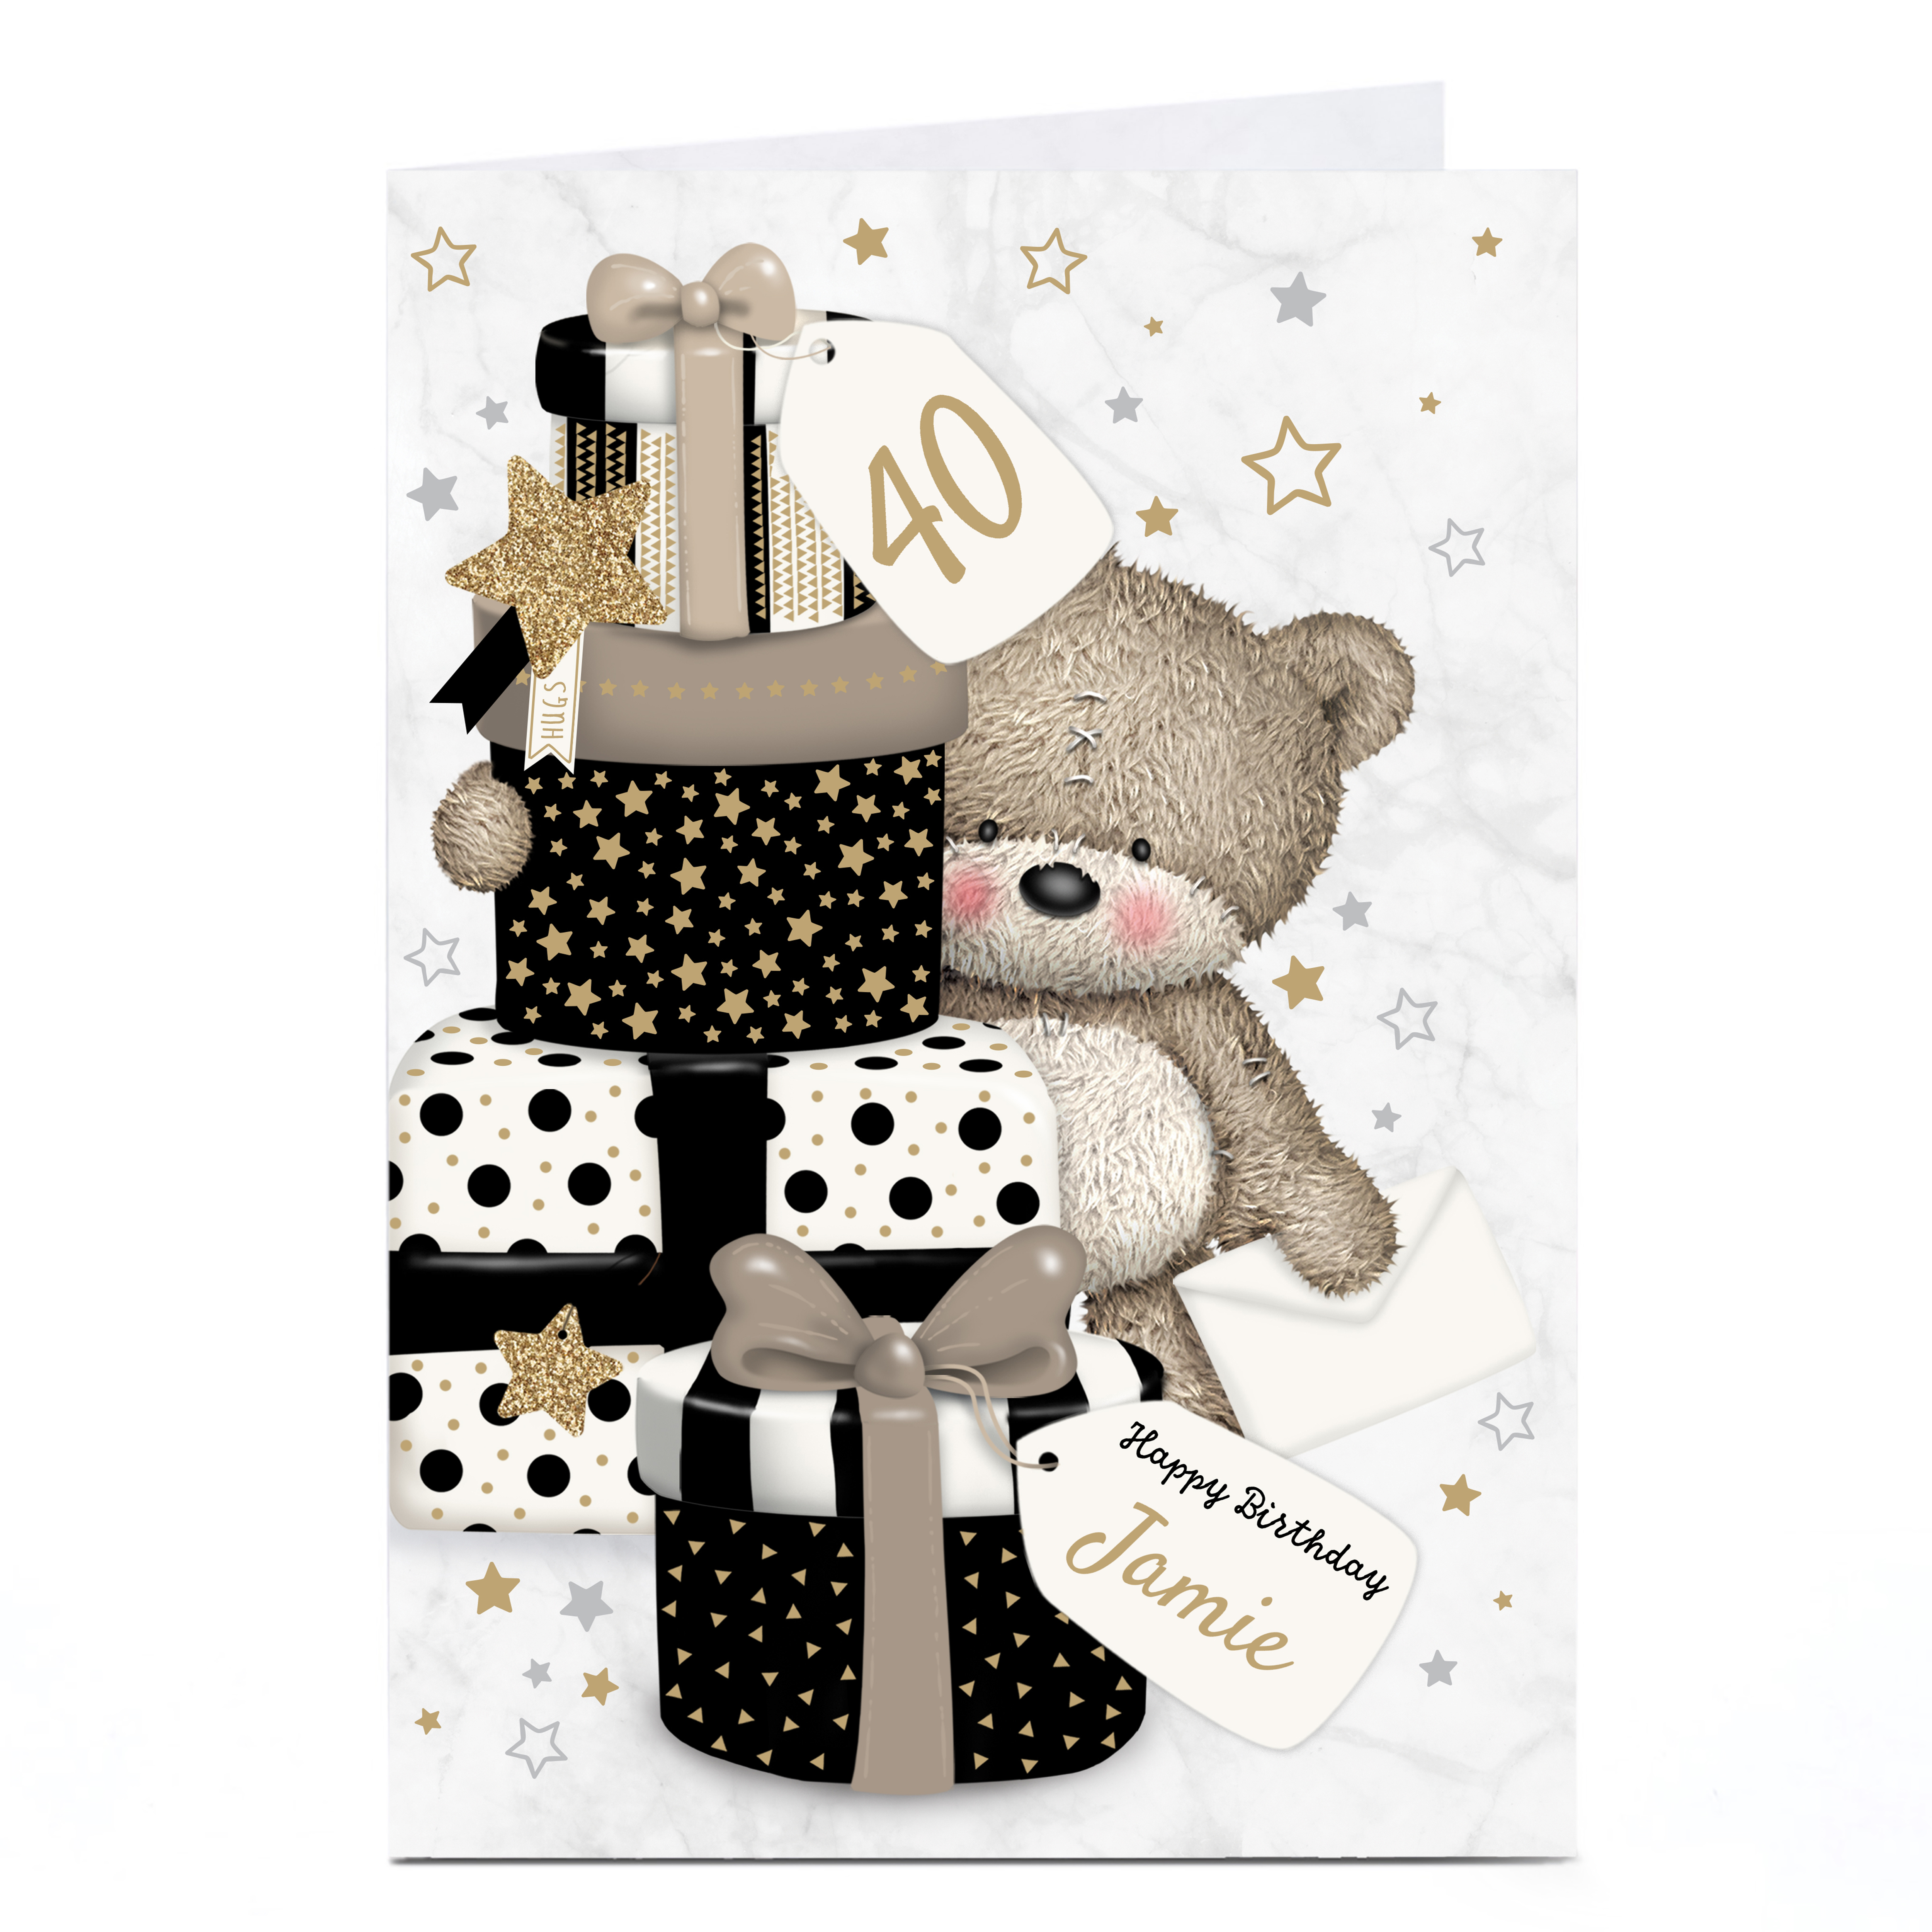 Personalised Hugs Bear Birthday Card - Black and Gold Gifts, Editable Age